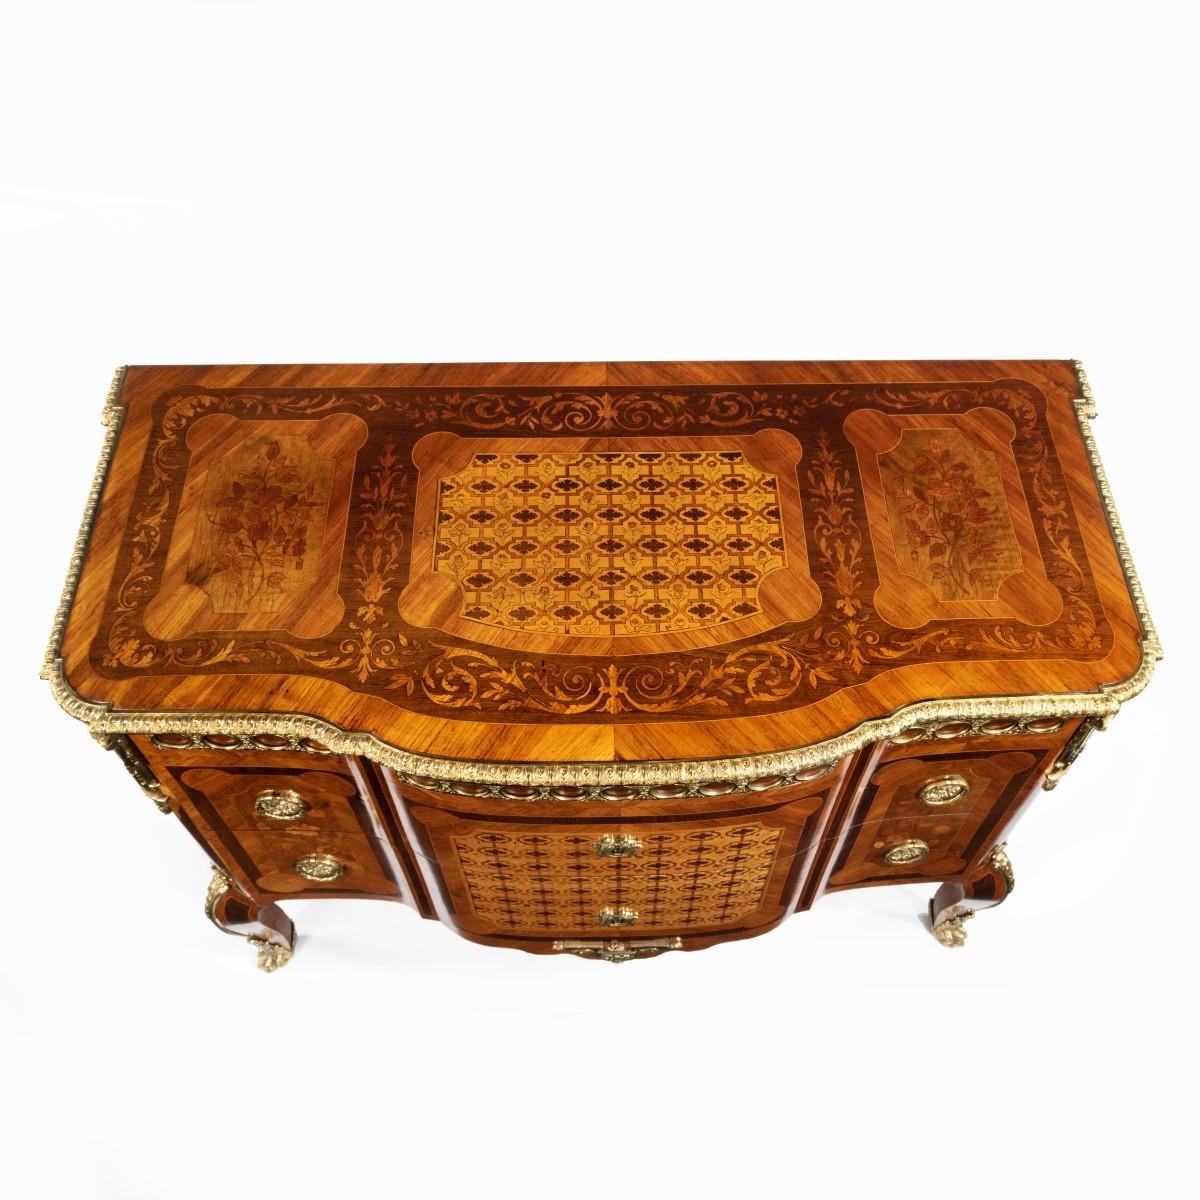 20th Century French Kingwood Marquetery Commode